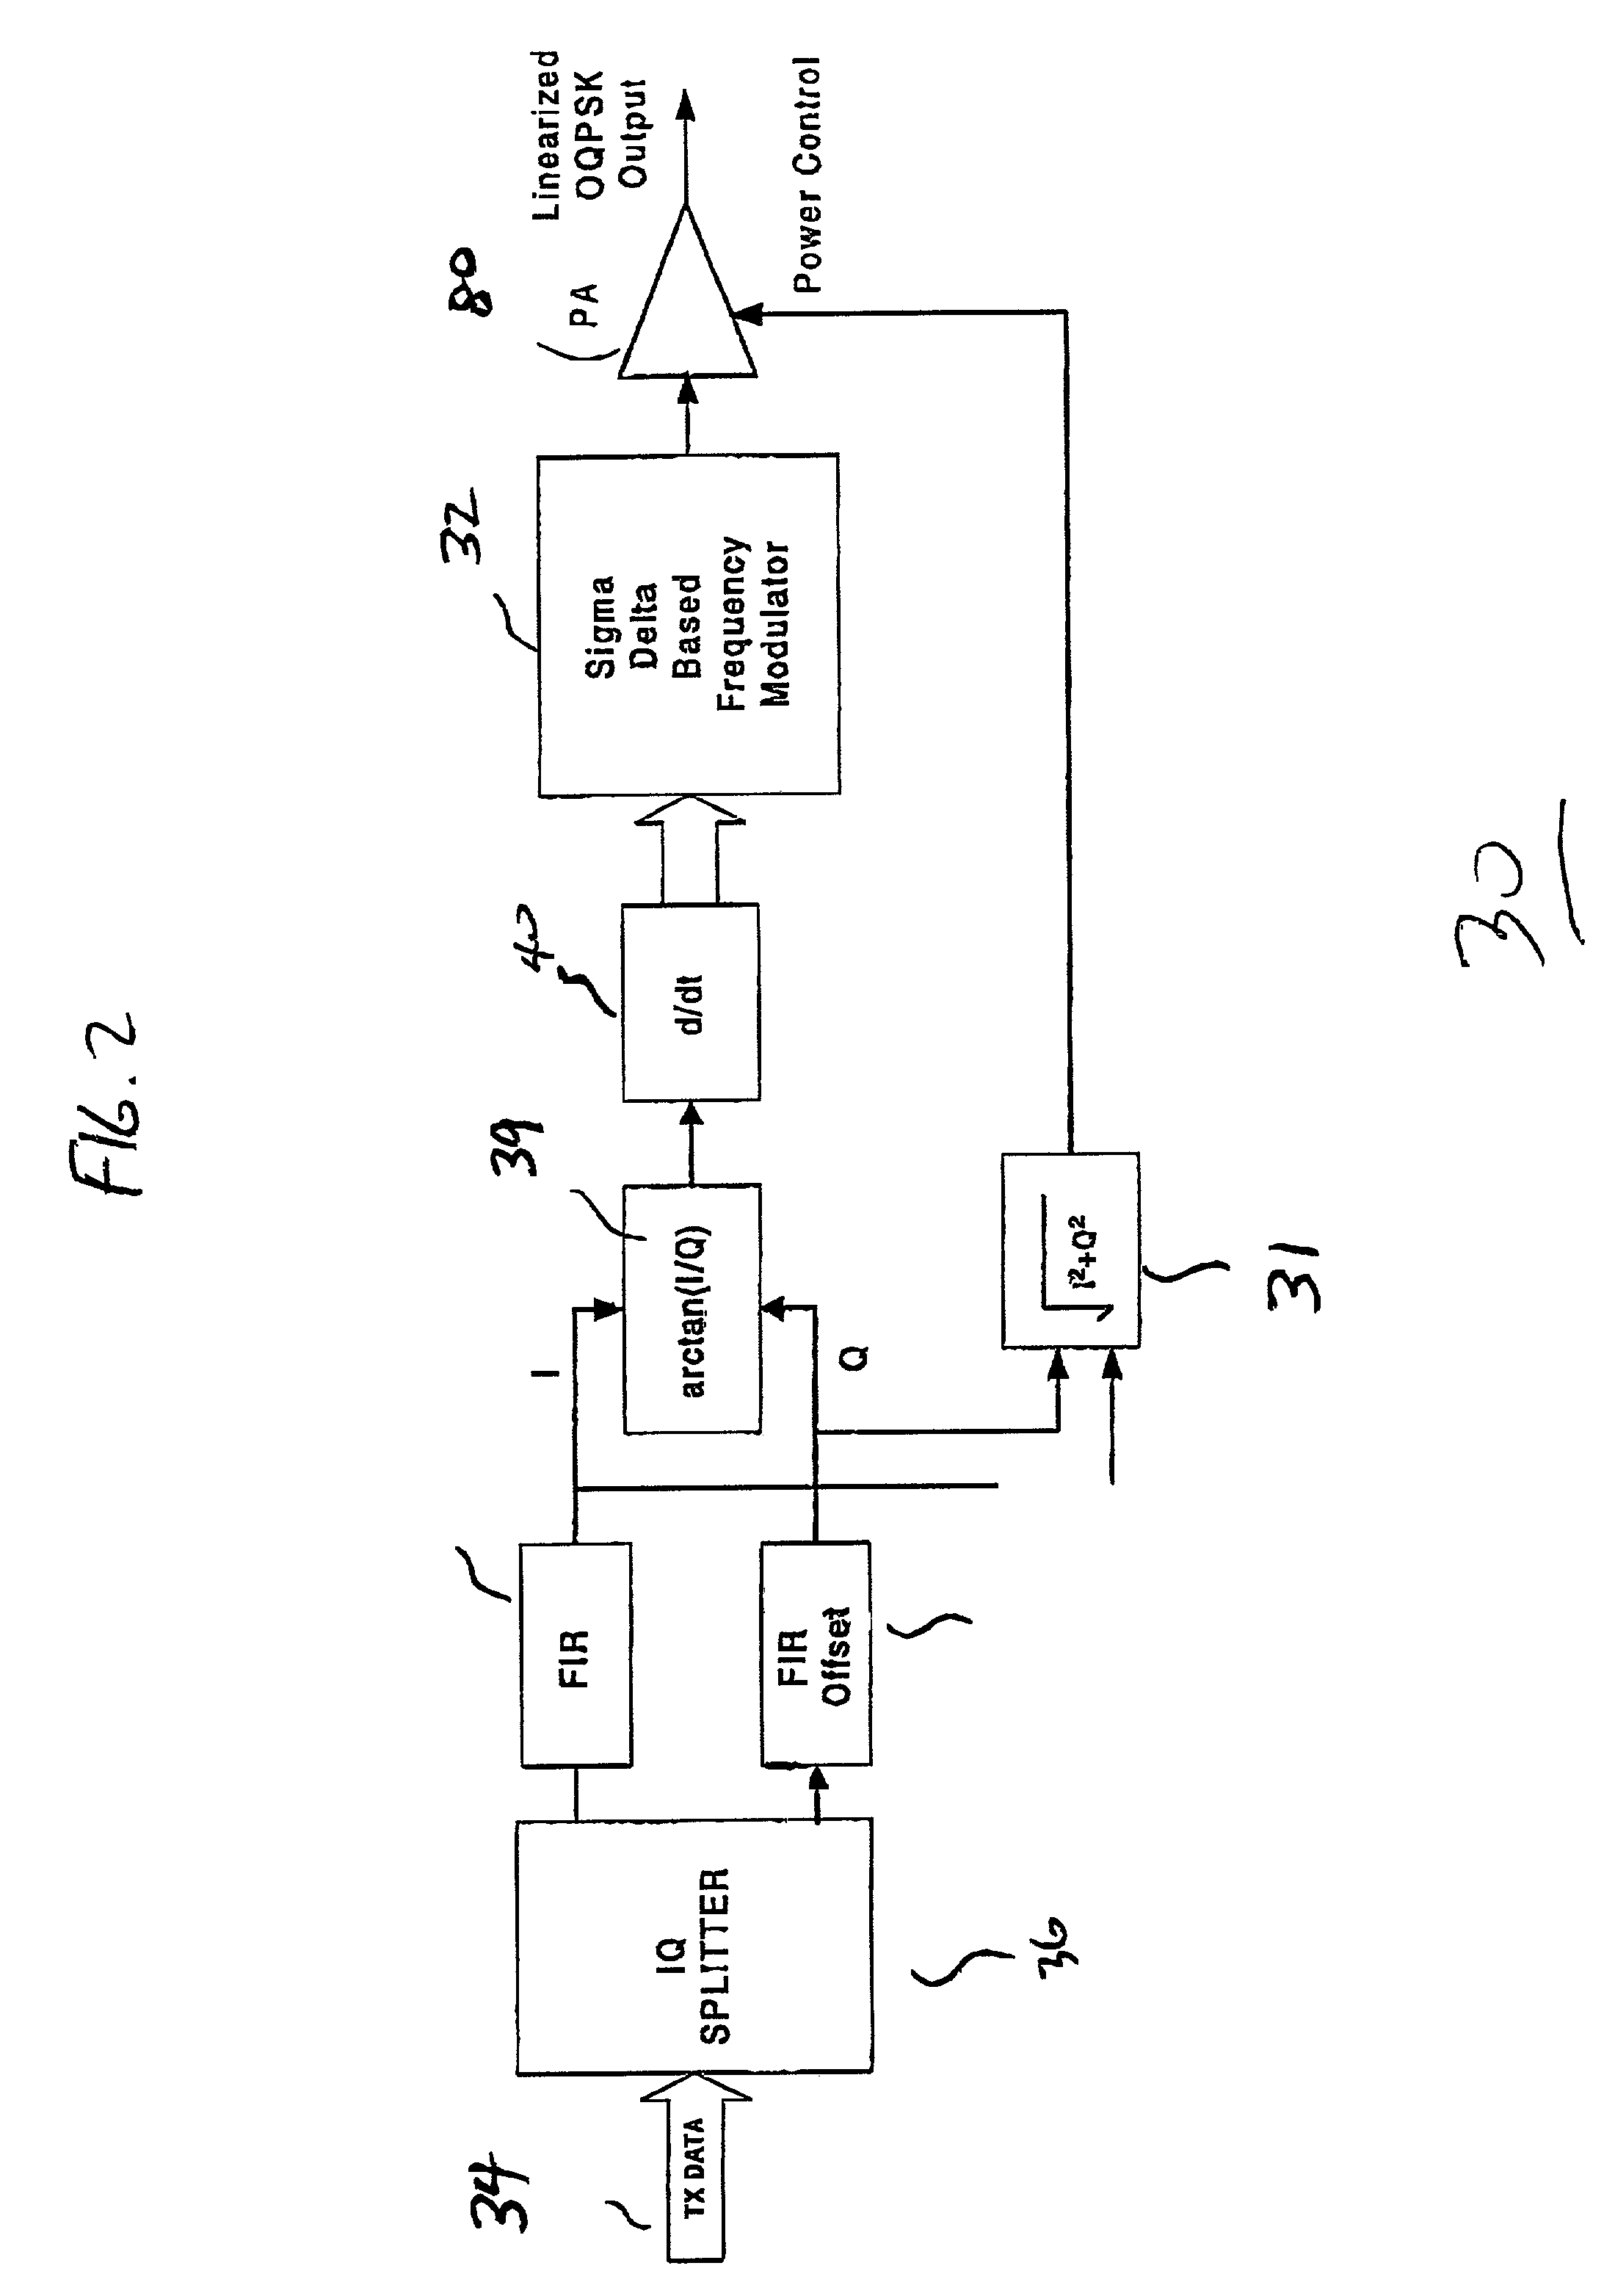 Linearized offset QPSK modulation utilizing a sigma-delta based frequency modulator